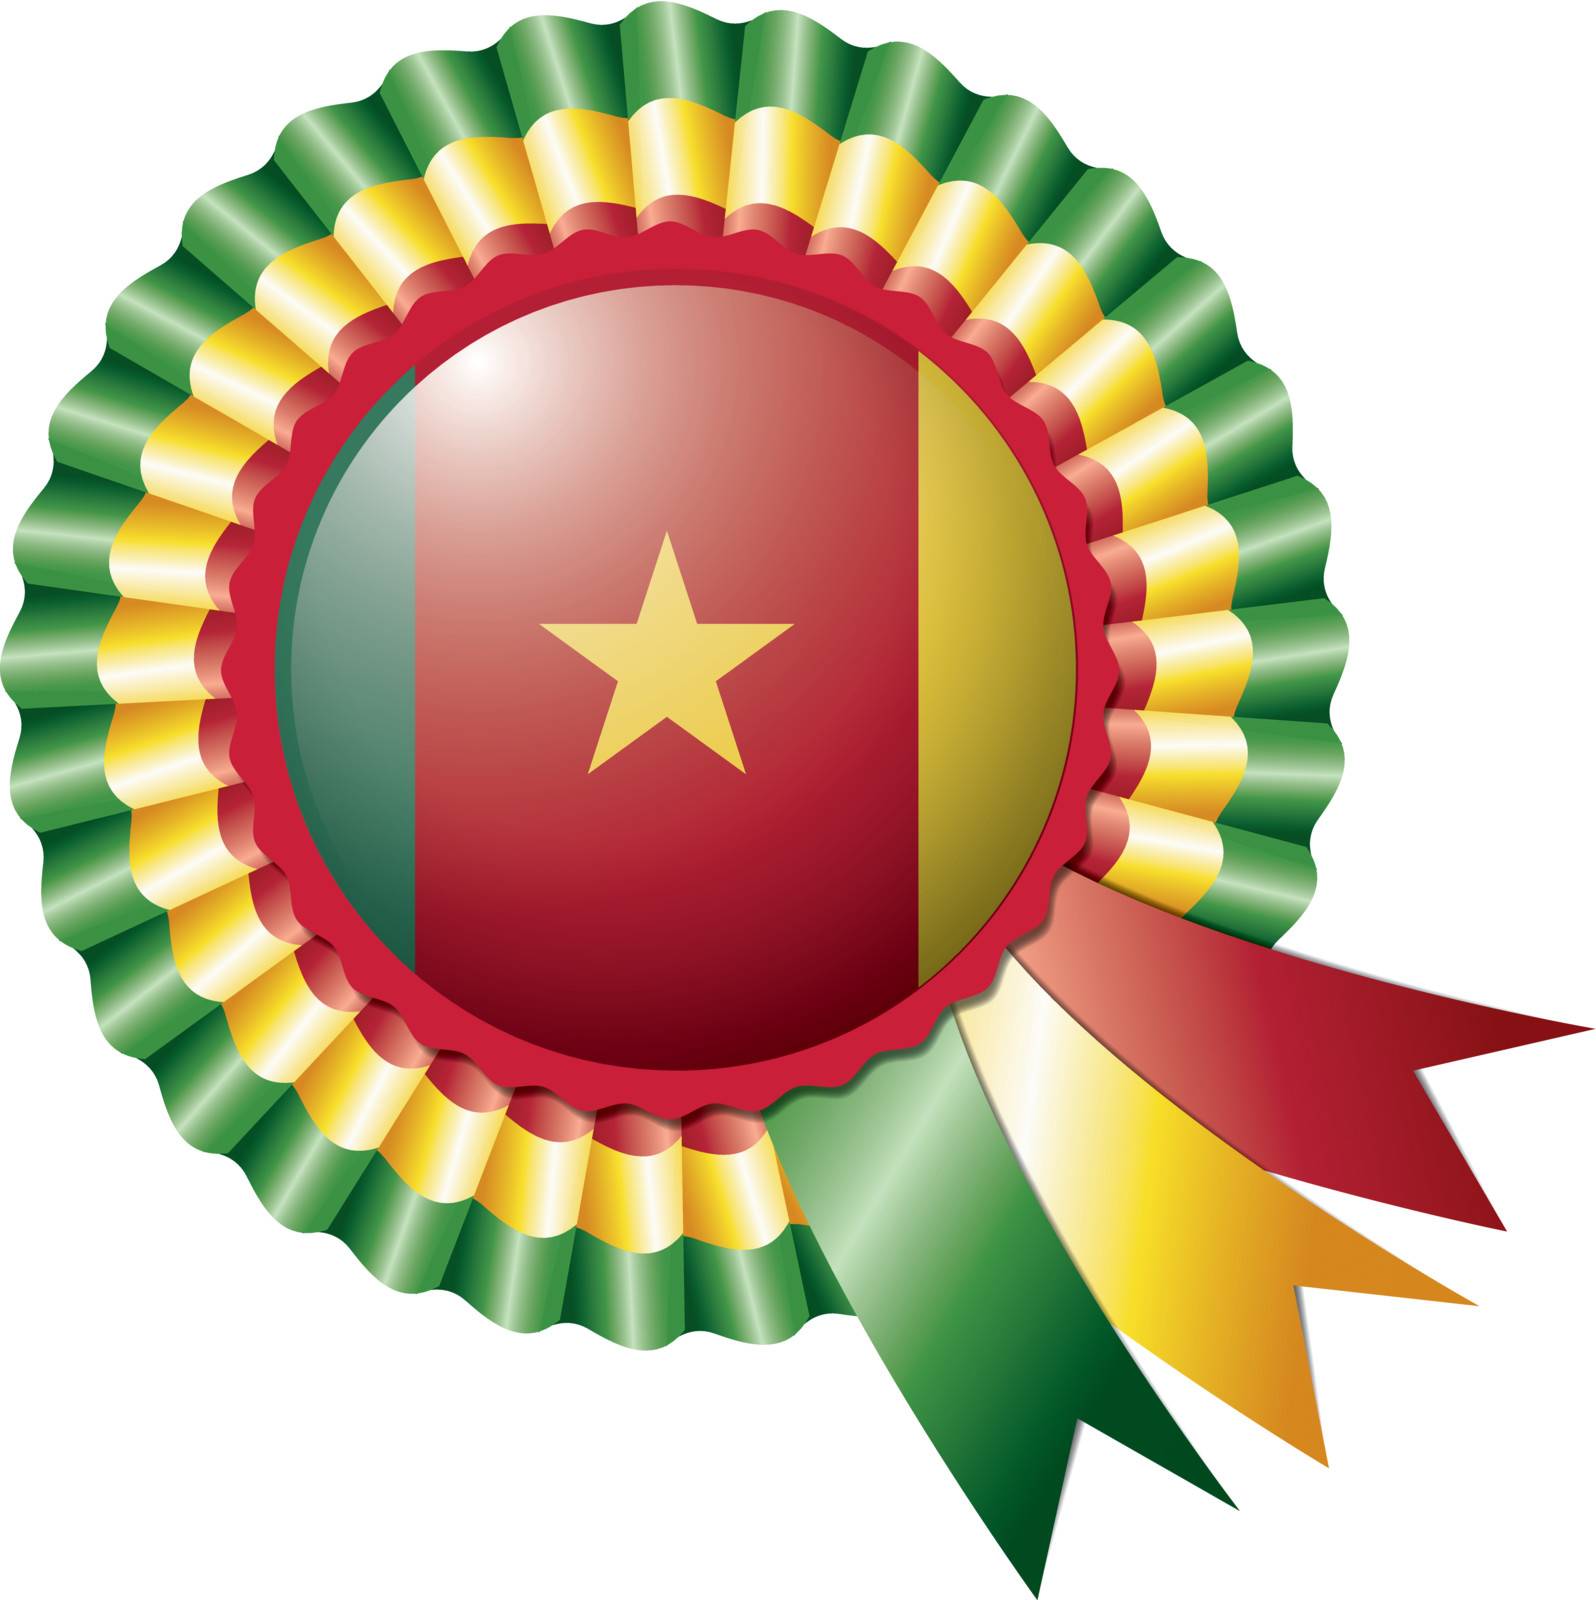 Cameroon rosette flag by milinz